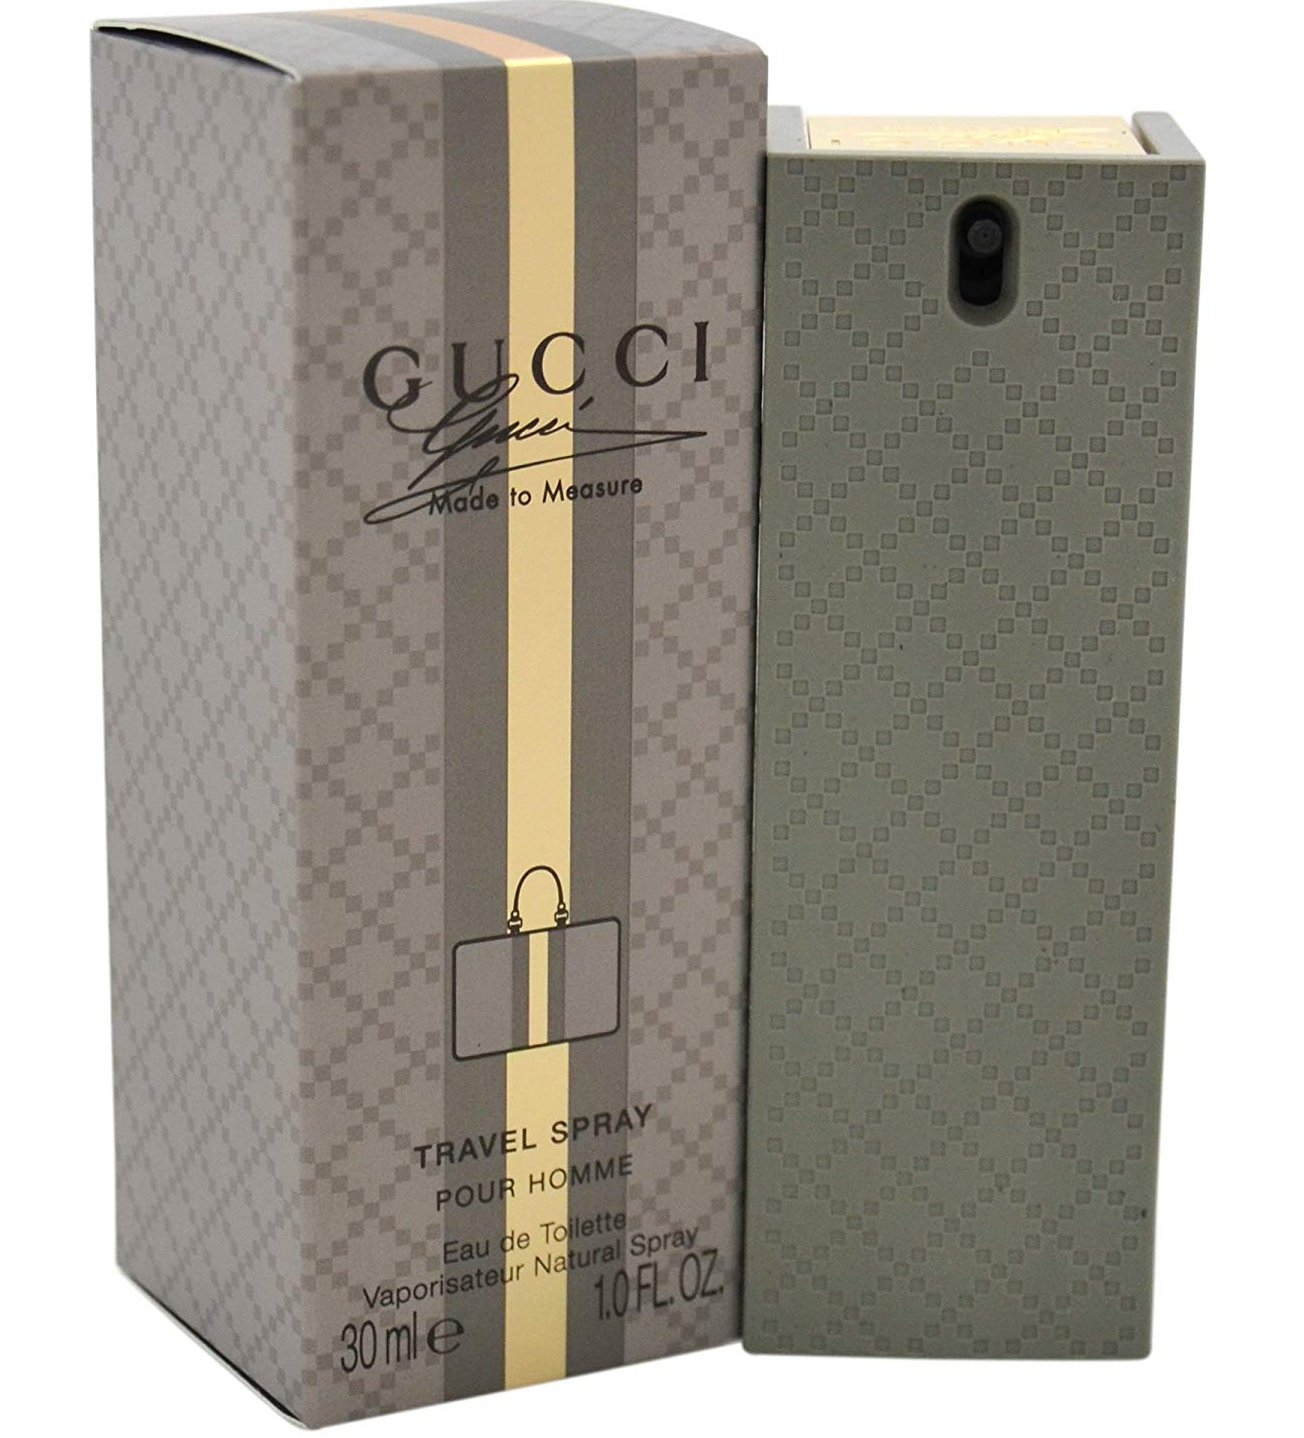 Gucci Made To Measure Travel Spray Edt 30ml